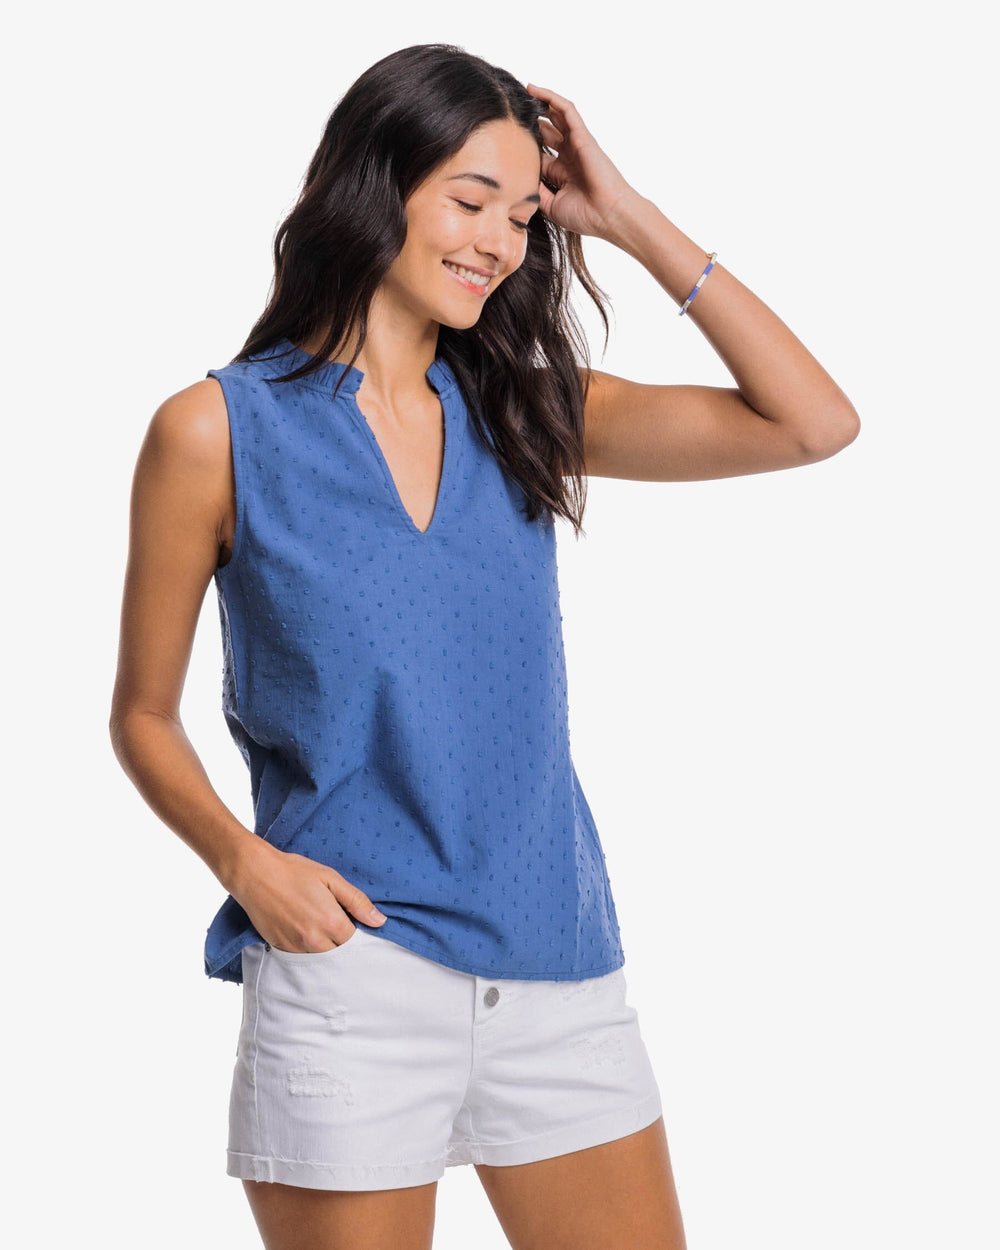 The front view of the Southern Tide Mary Catherine Swiss Dot Top by Southern Tide - Seven Seas Blue